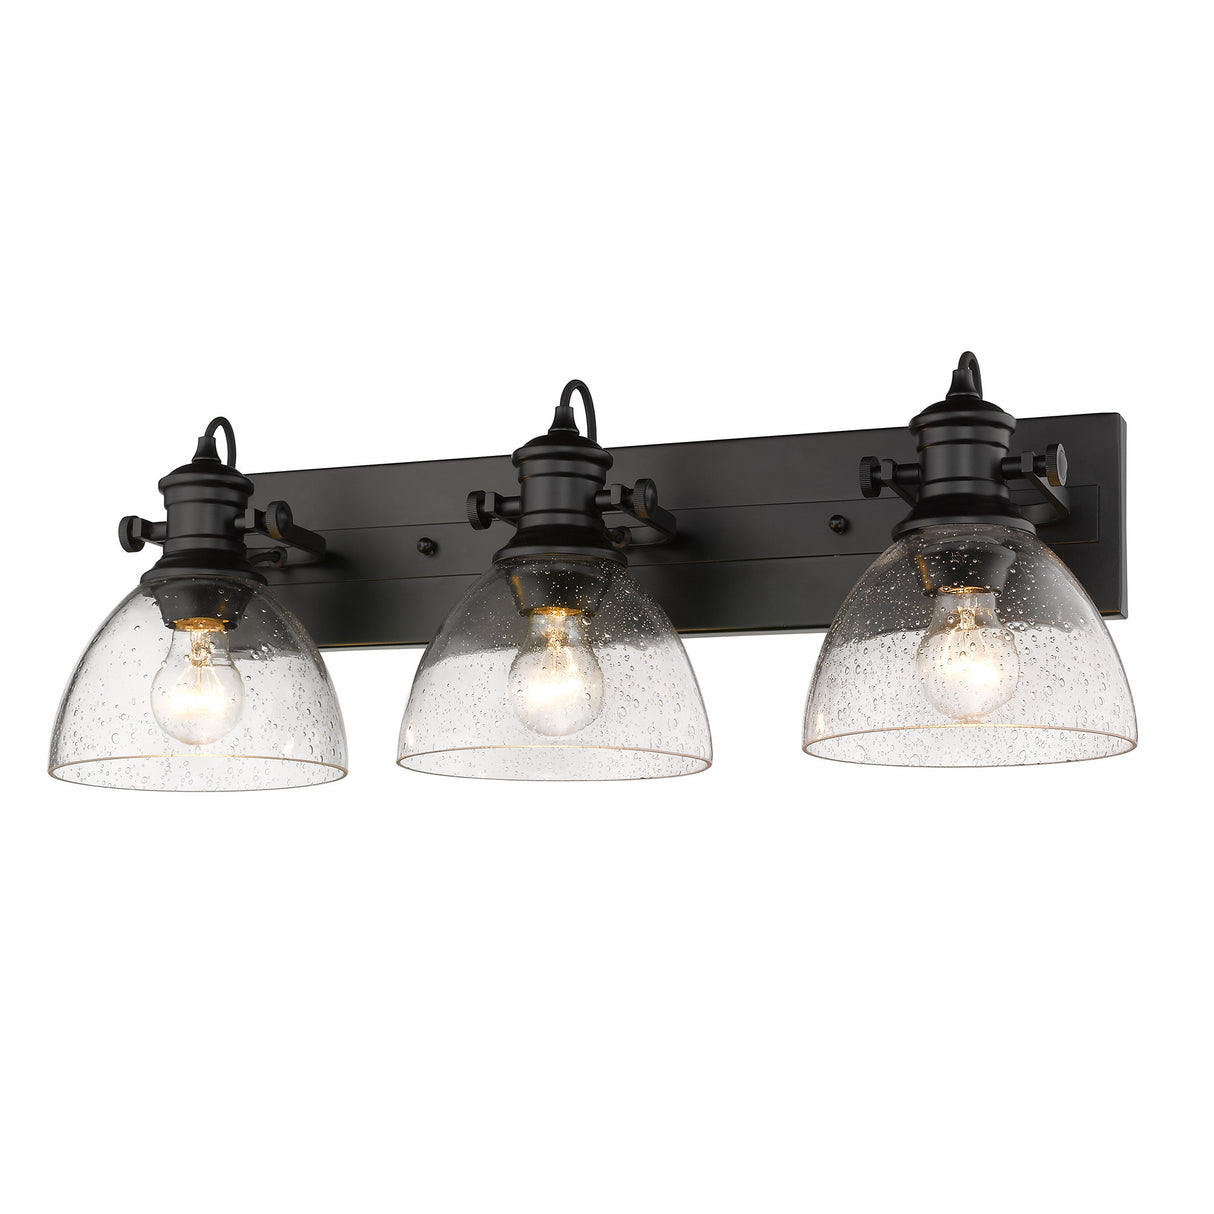 Hines 3-Light Semi-Flush in Matte Black with Seeded Glass